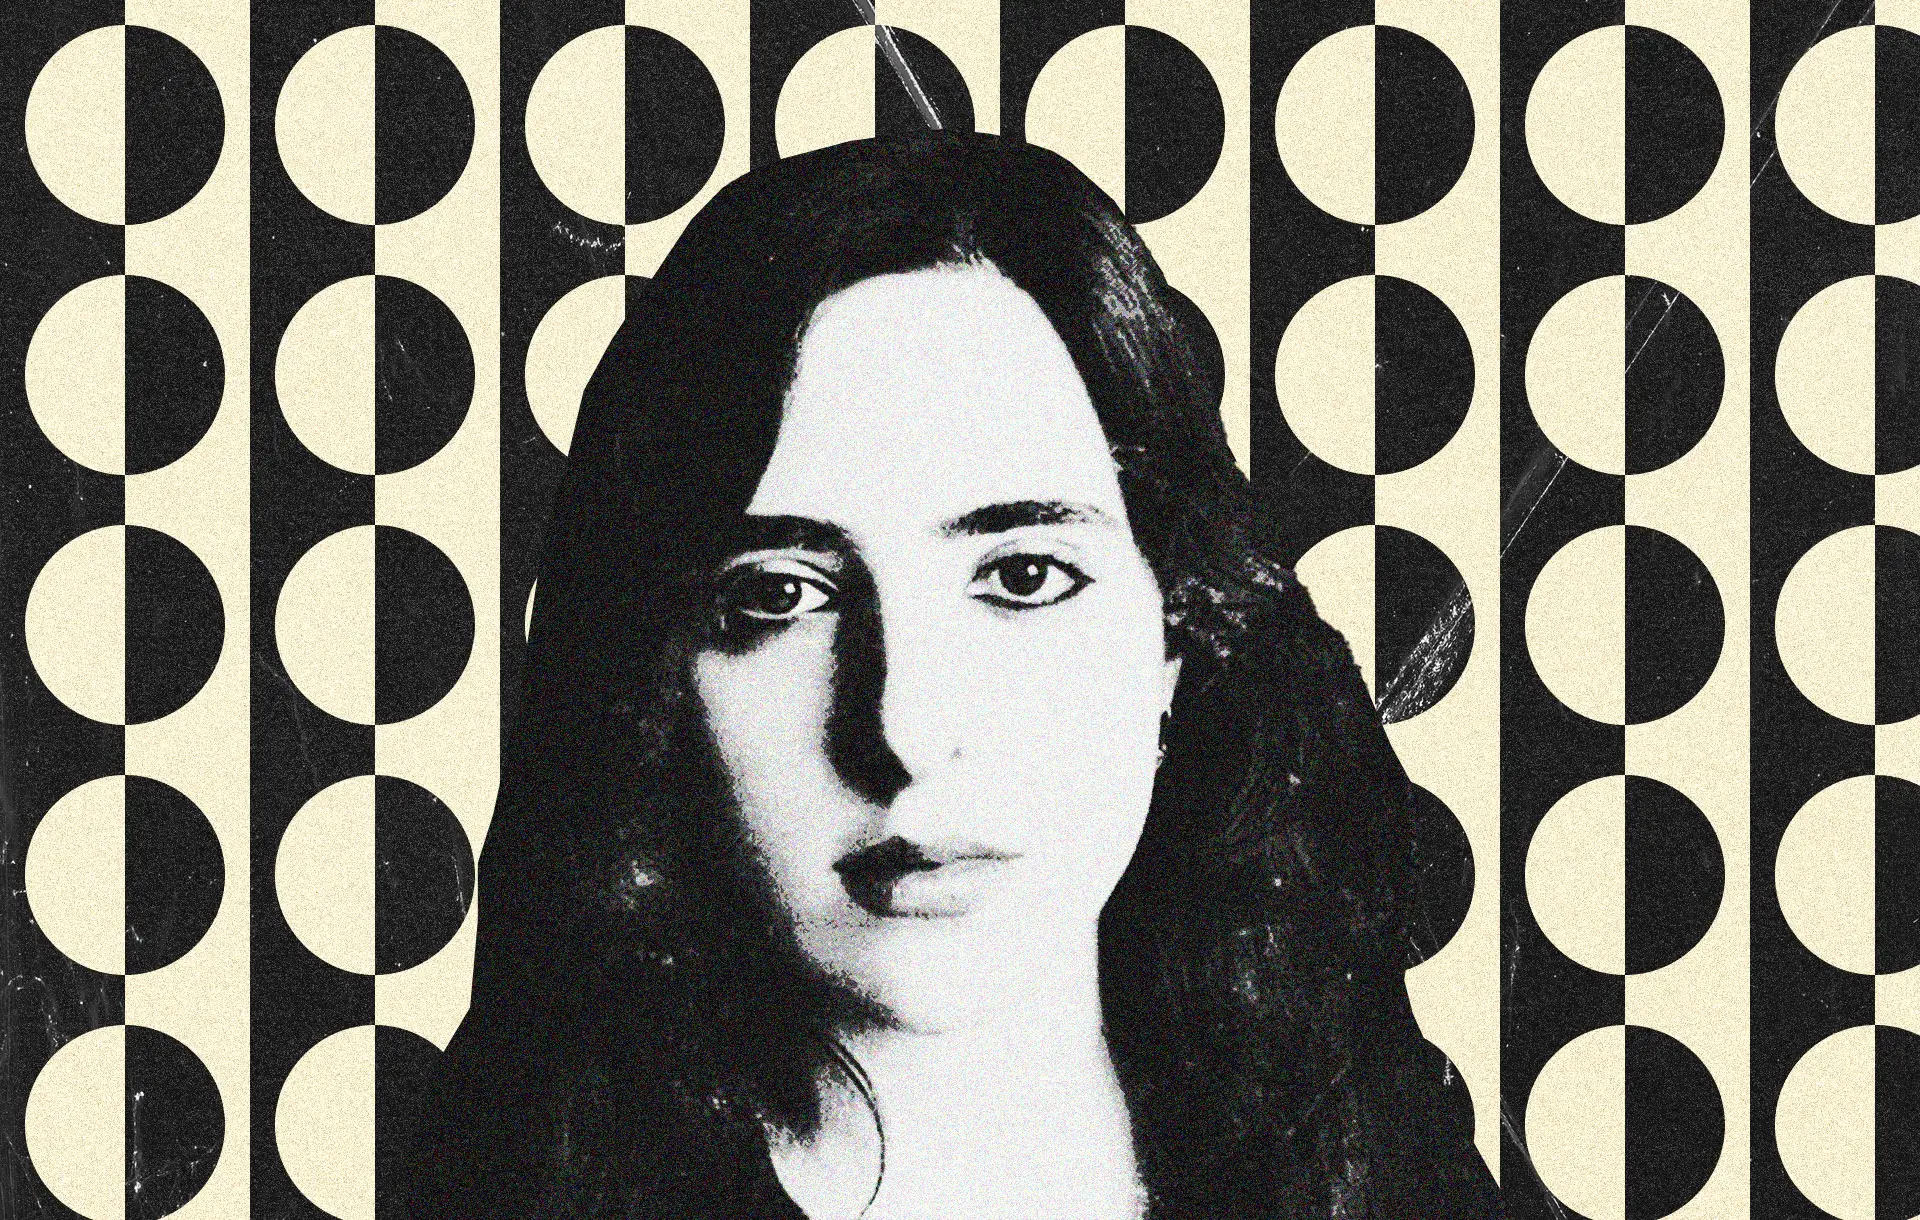 Laura Nyro - One Of Music's Greatest (Un)Sung Songwriters | Features | LIVING LIFE FEARLESS